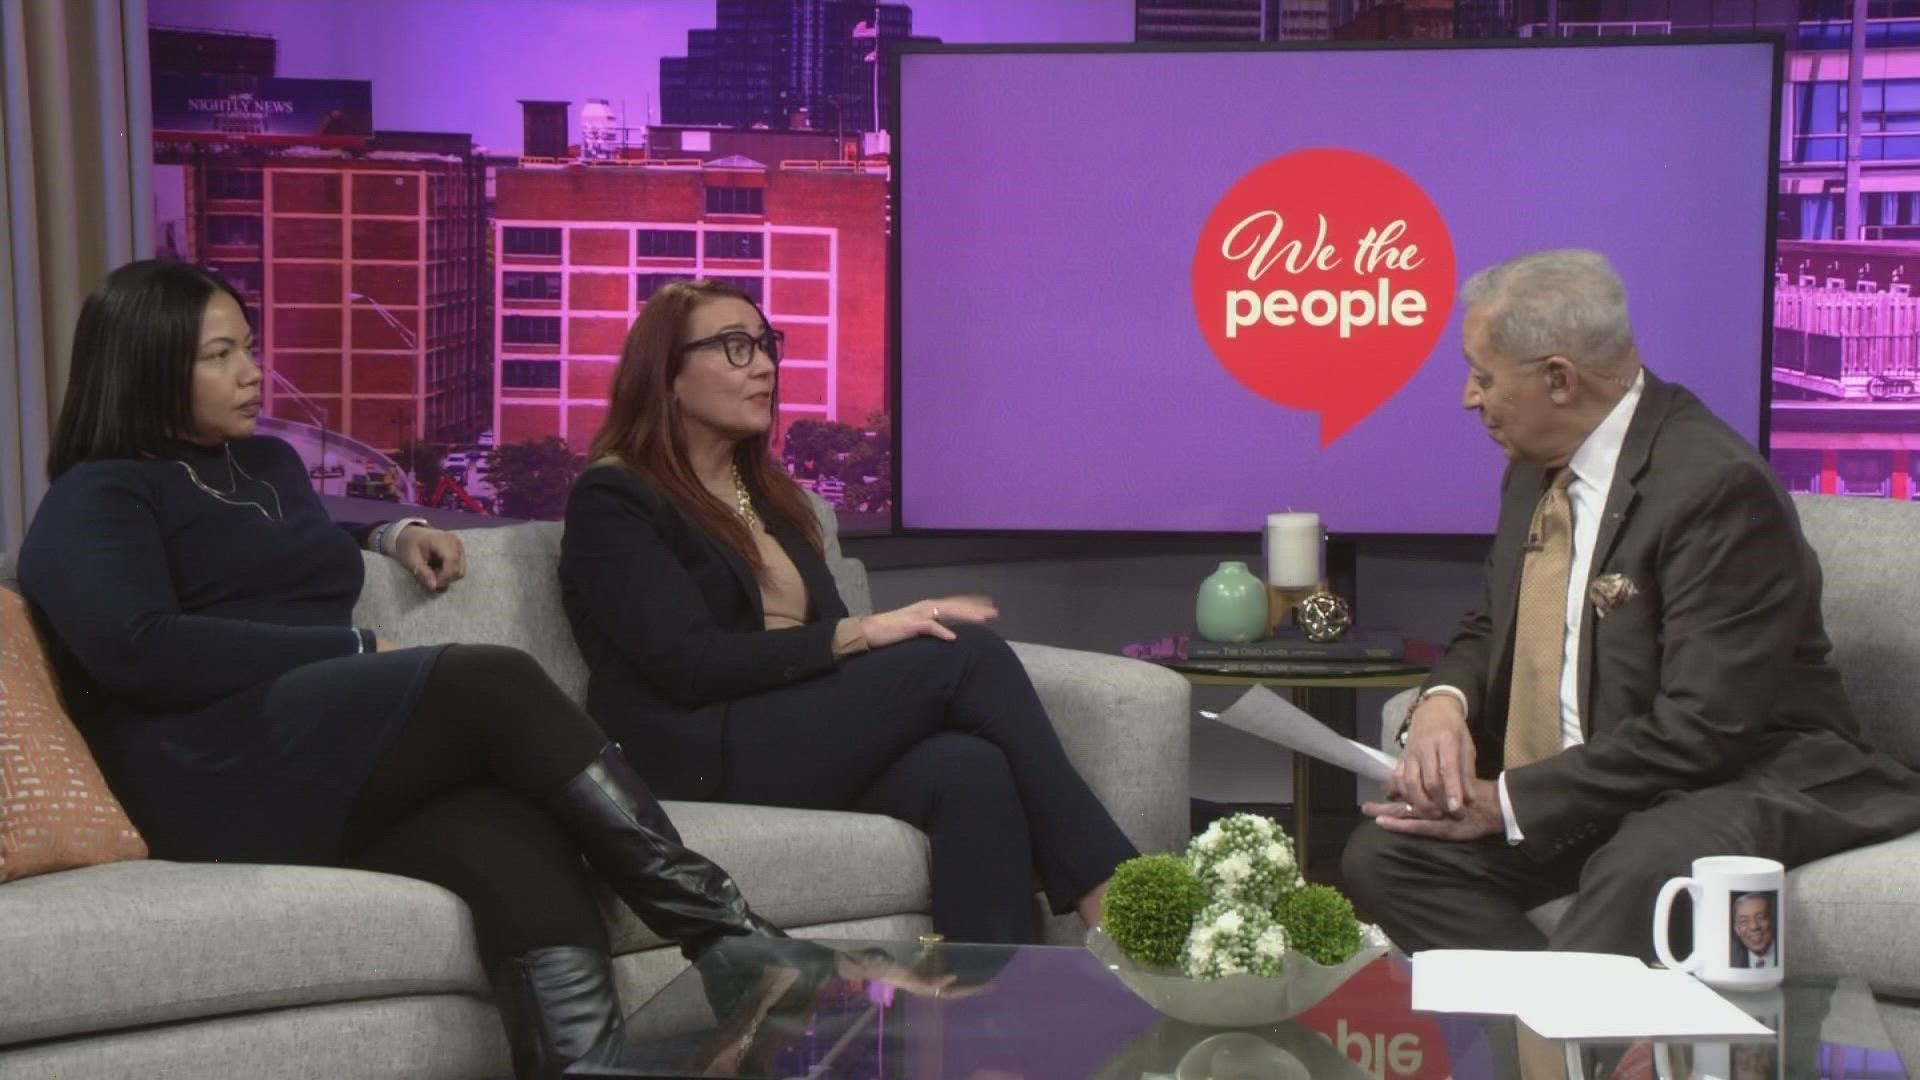 Leon talks with Kirsti Mouncey and Rachel Socorro about the Collaborative to End Human Trafficking, and the work they're doing to protect people in Ohio.